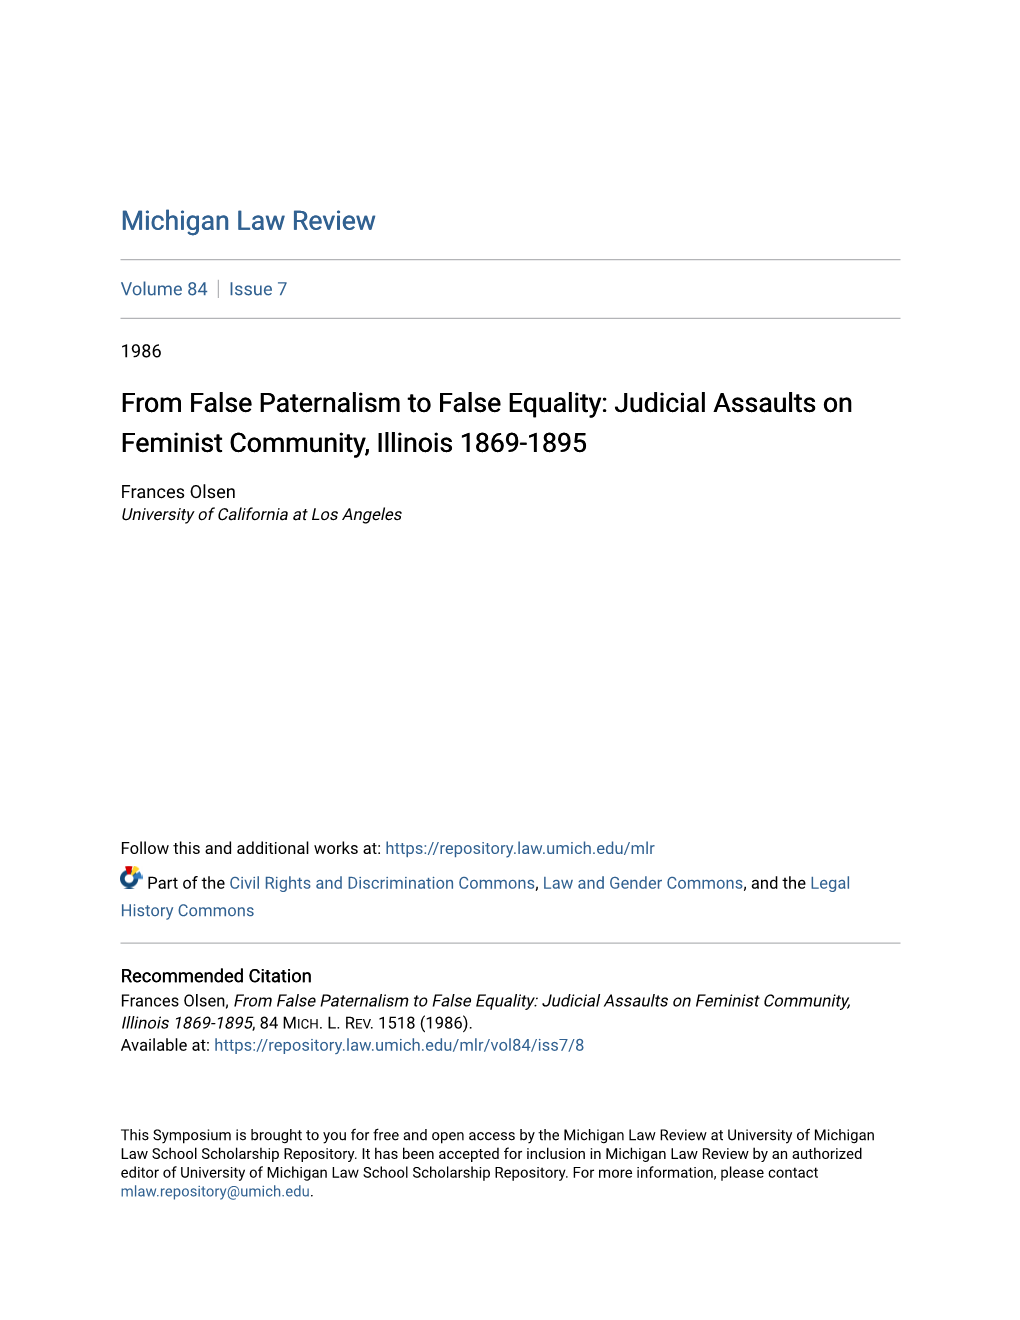 From False Paternalism to False Equality: Judicial Assaults on Feminist Community, Illinois 1869-1895